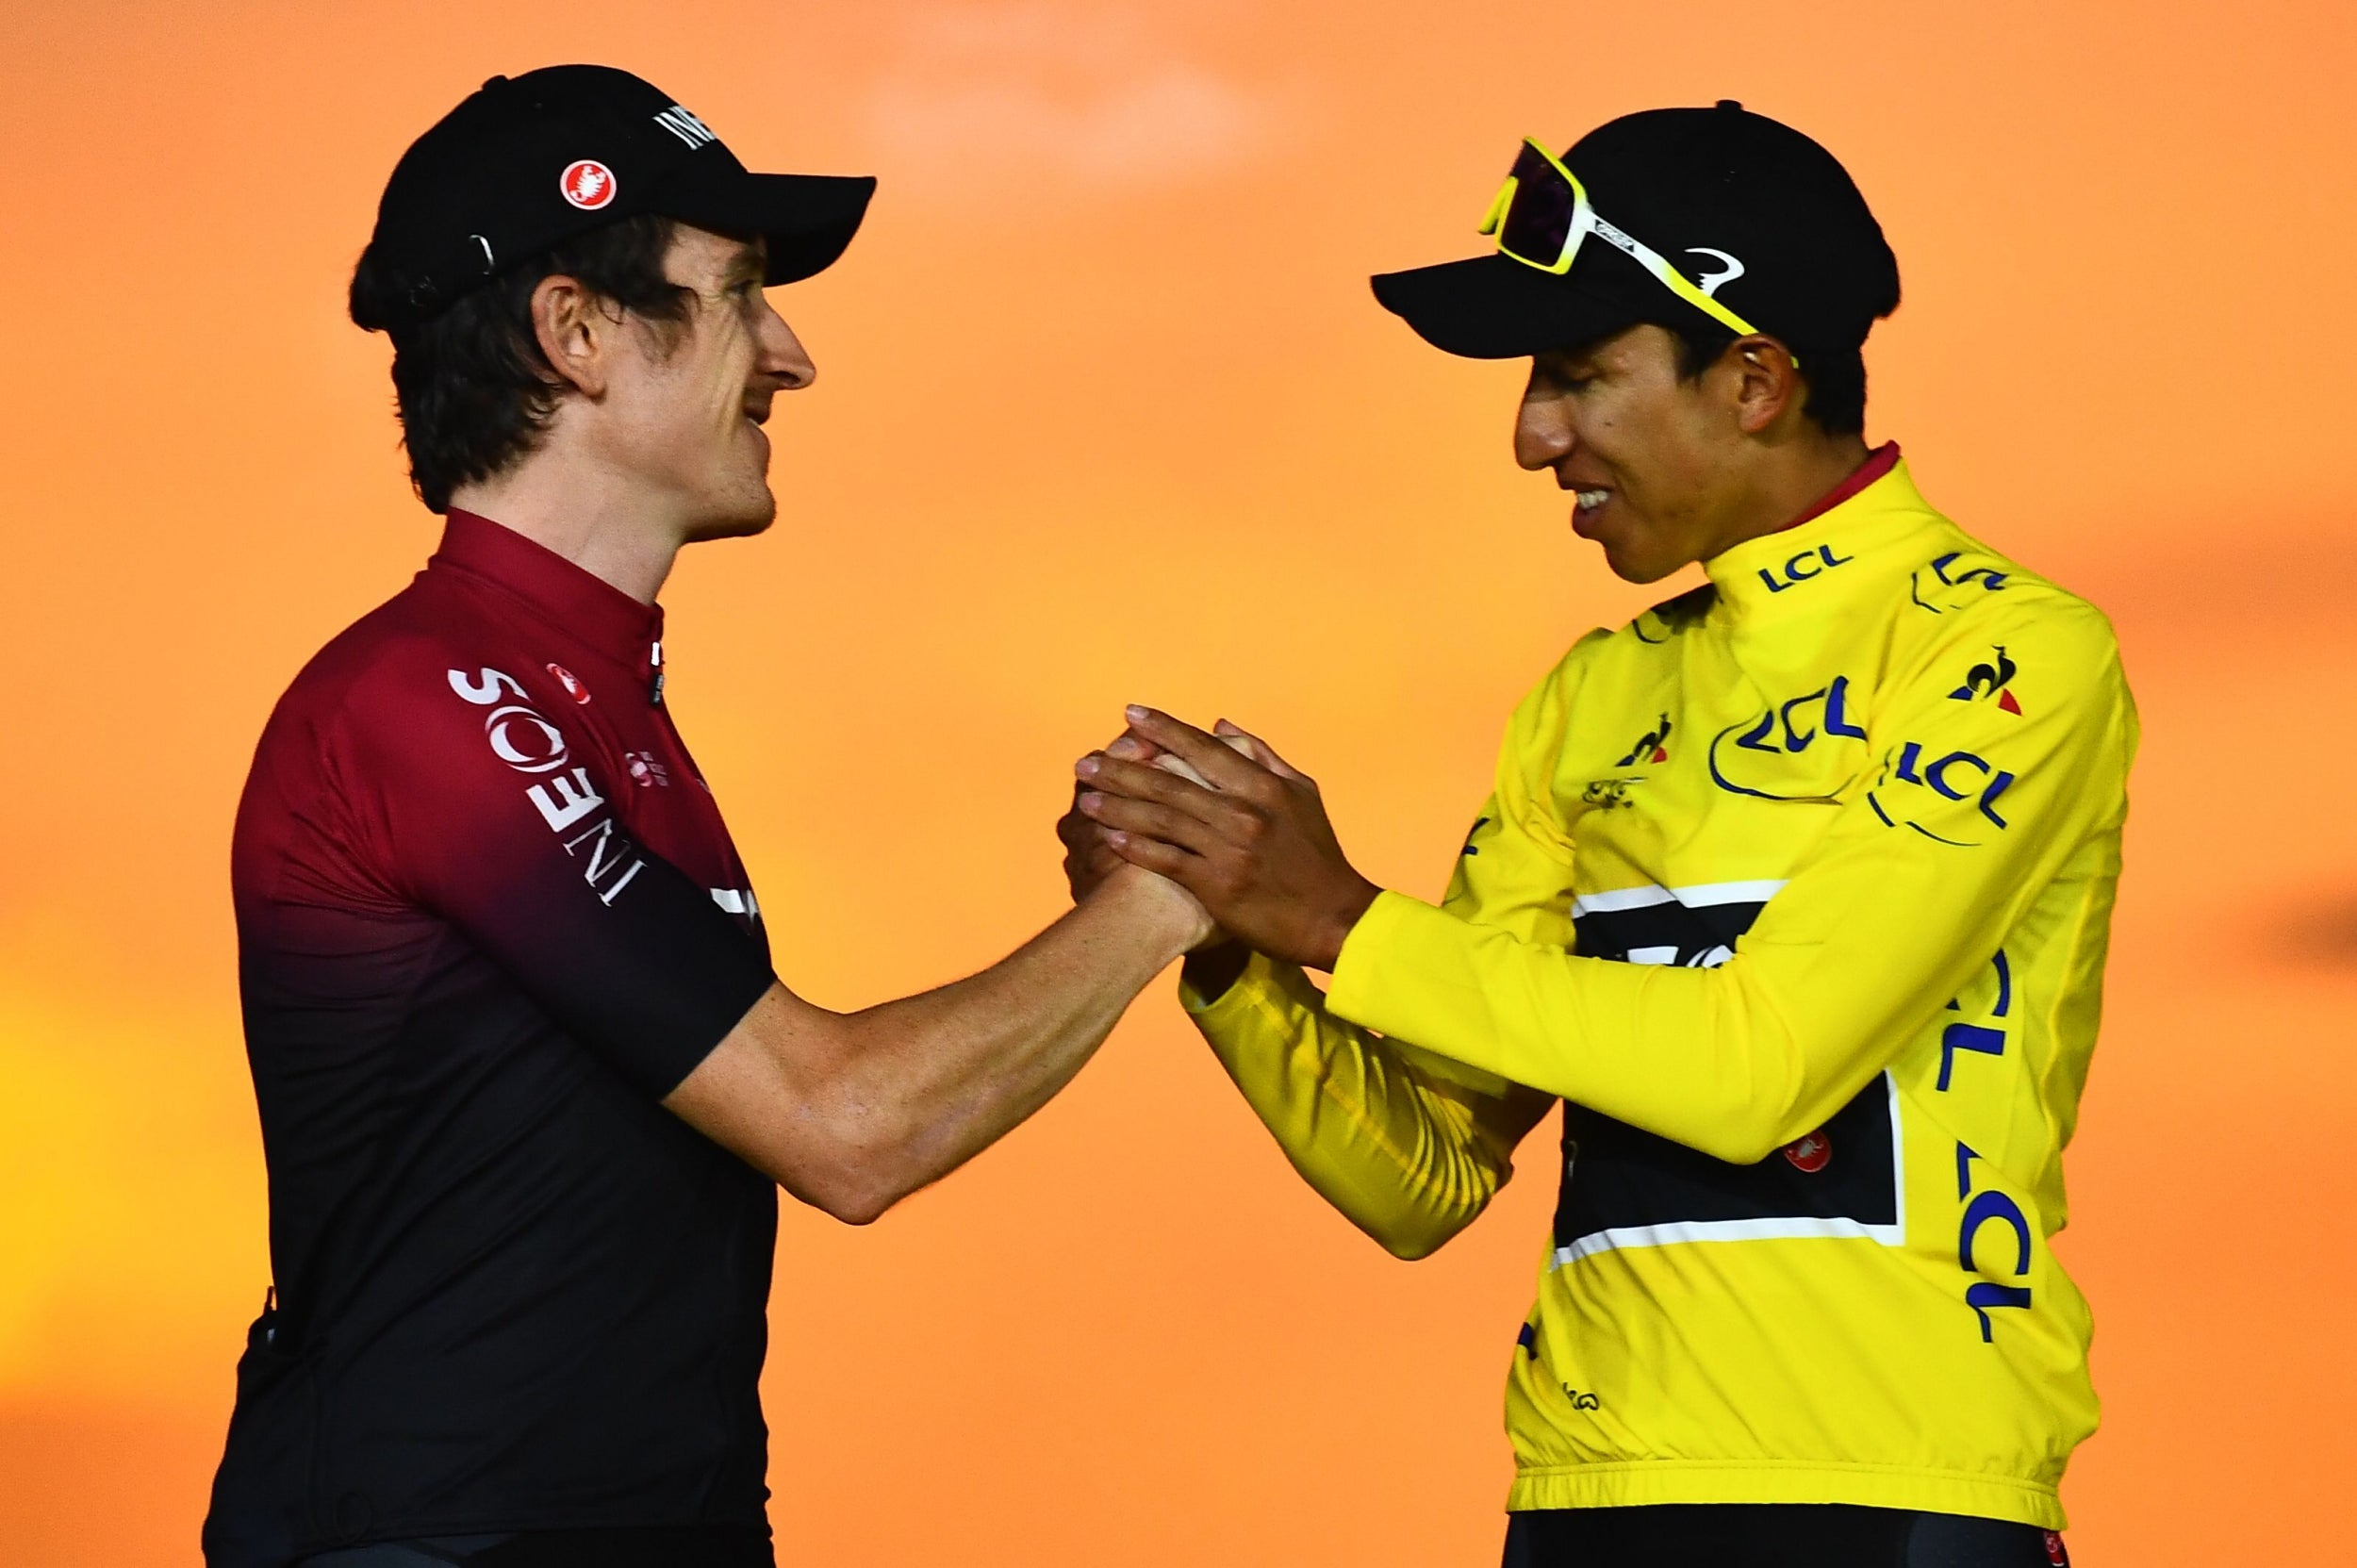 Thomas finished second behind team mate Egan Bernal at this summer's Tour de France